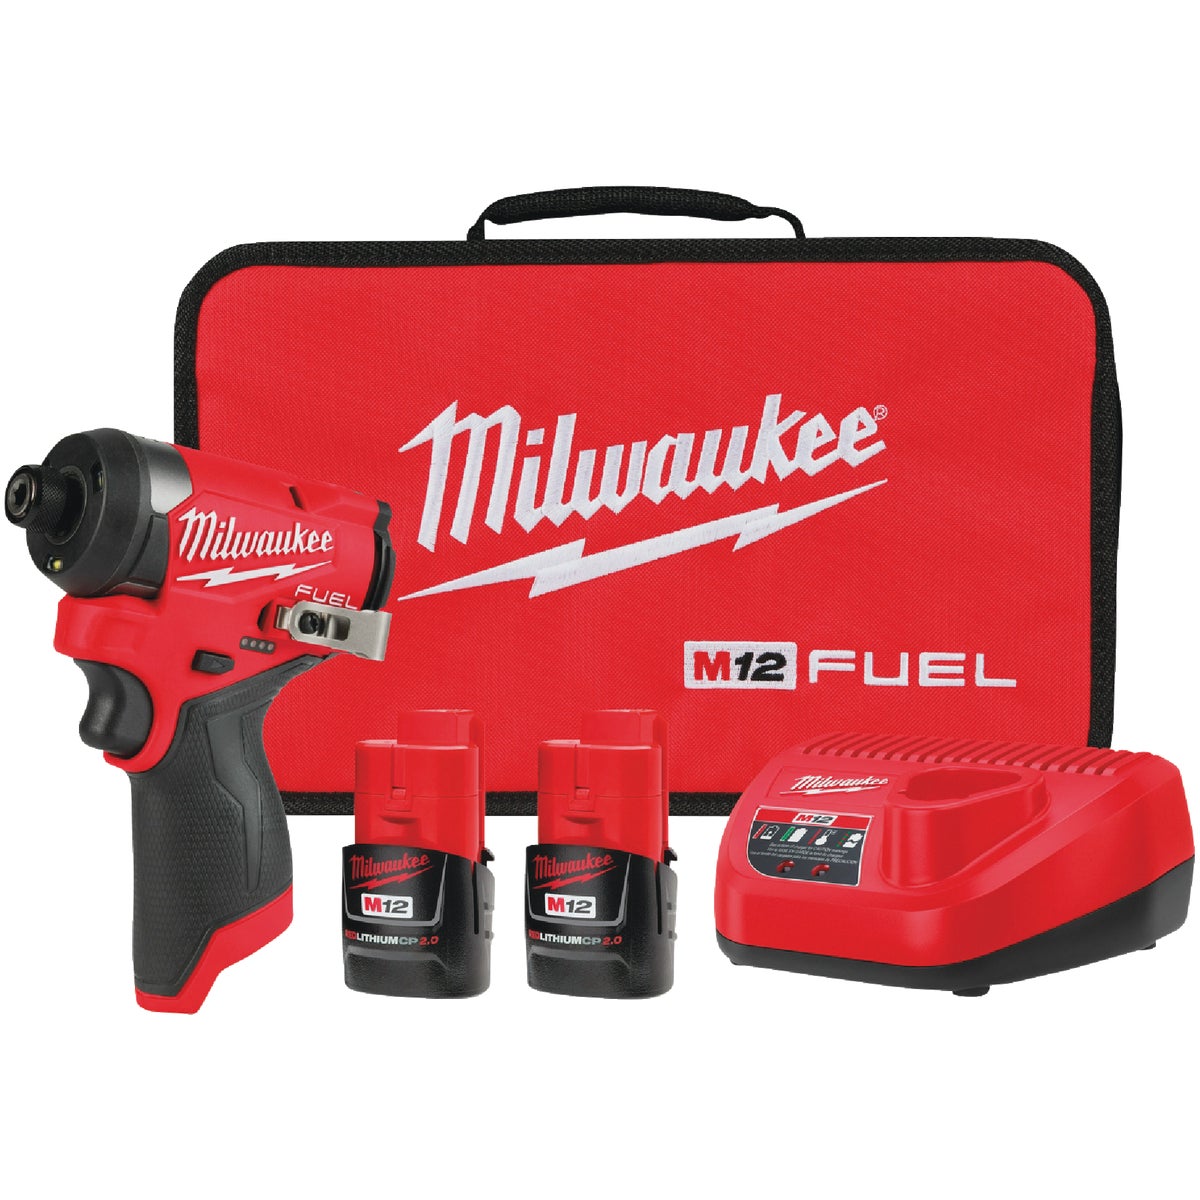 Milwaukee M12 FUEL Brushless 1/4 In. Hex Subcompact Cordless Impact Driver Kit